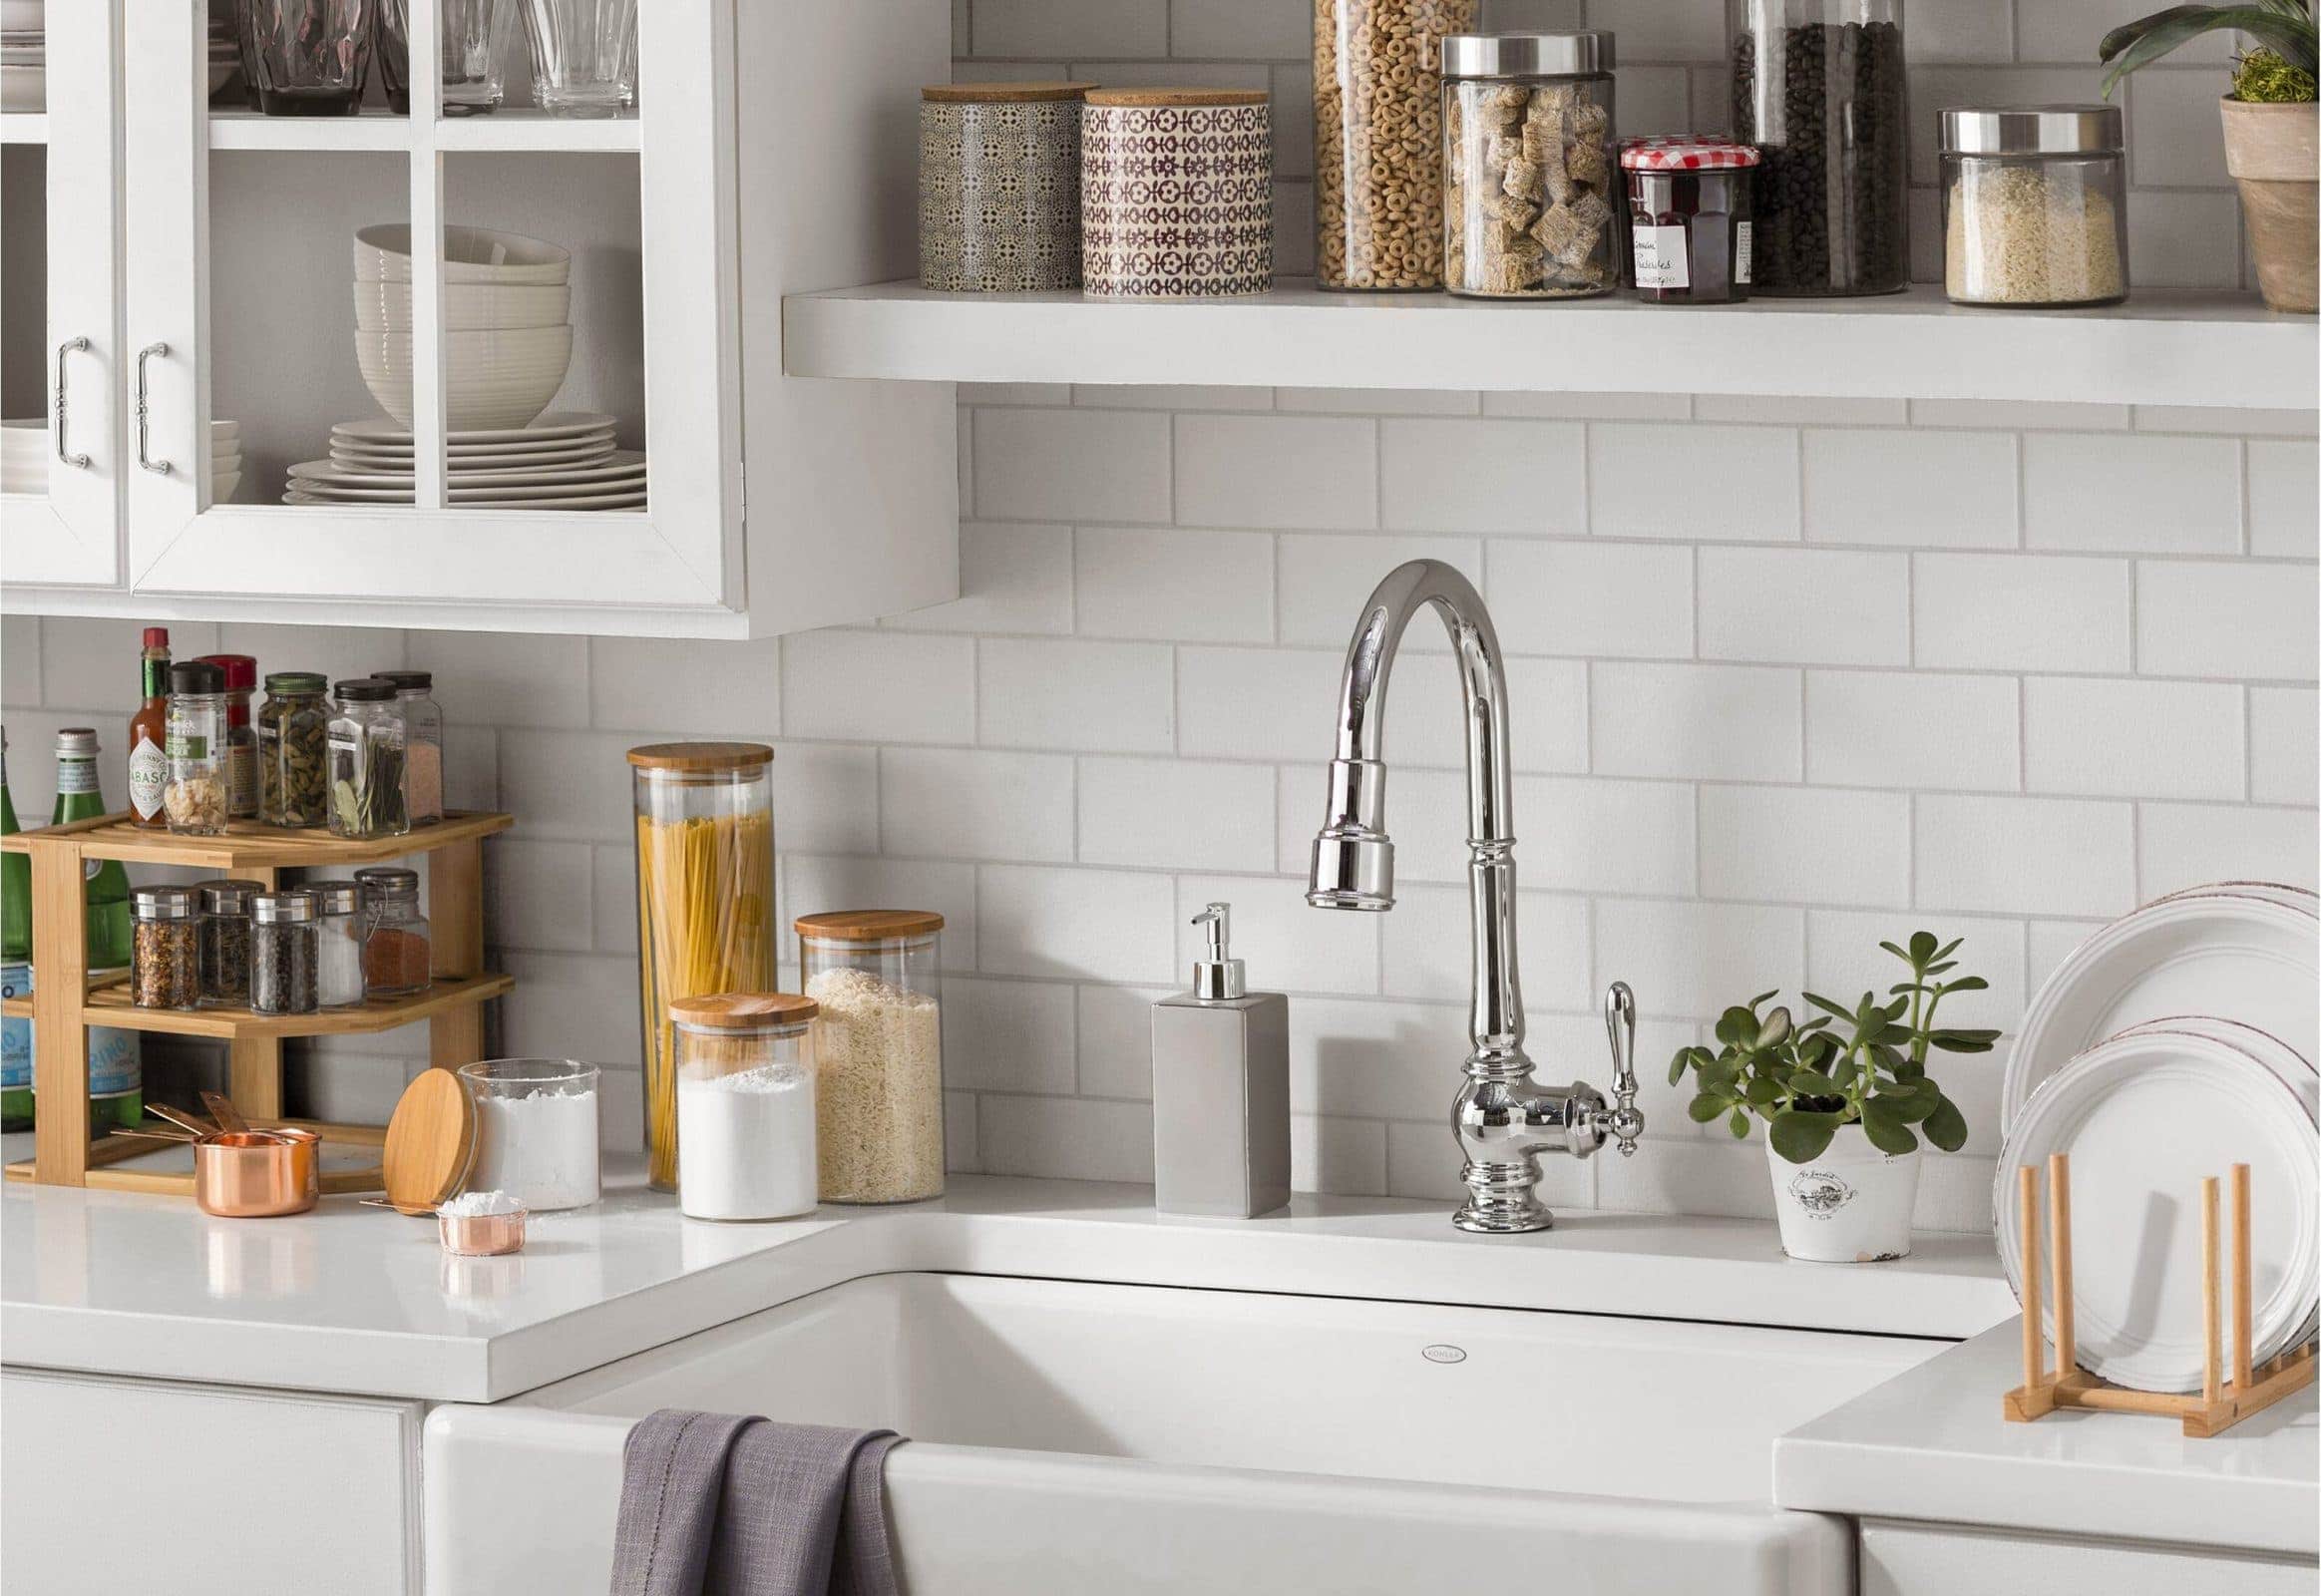 19 Kitchen Countertop Organization Ideas You Can’t Live Without